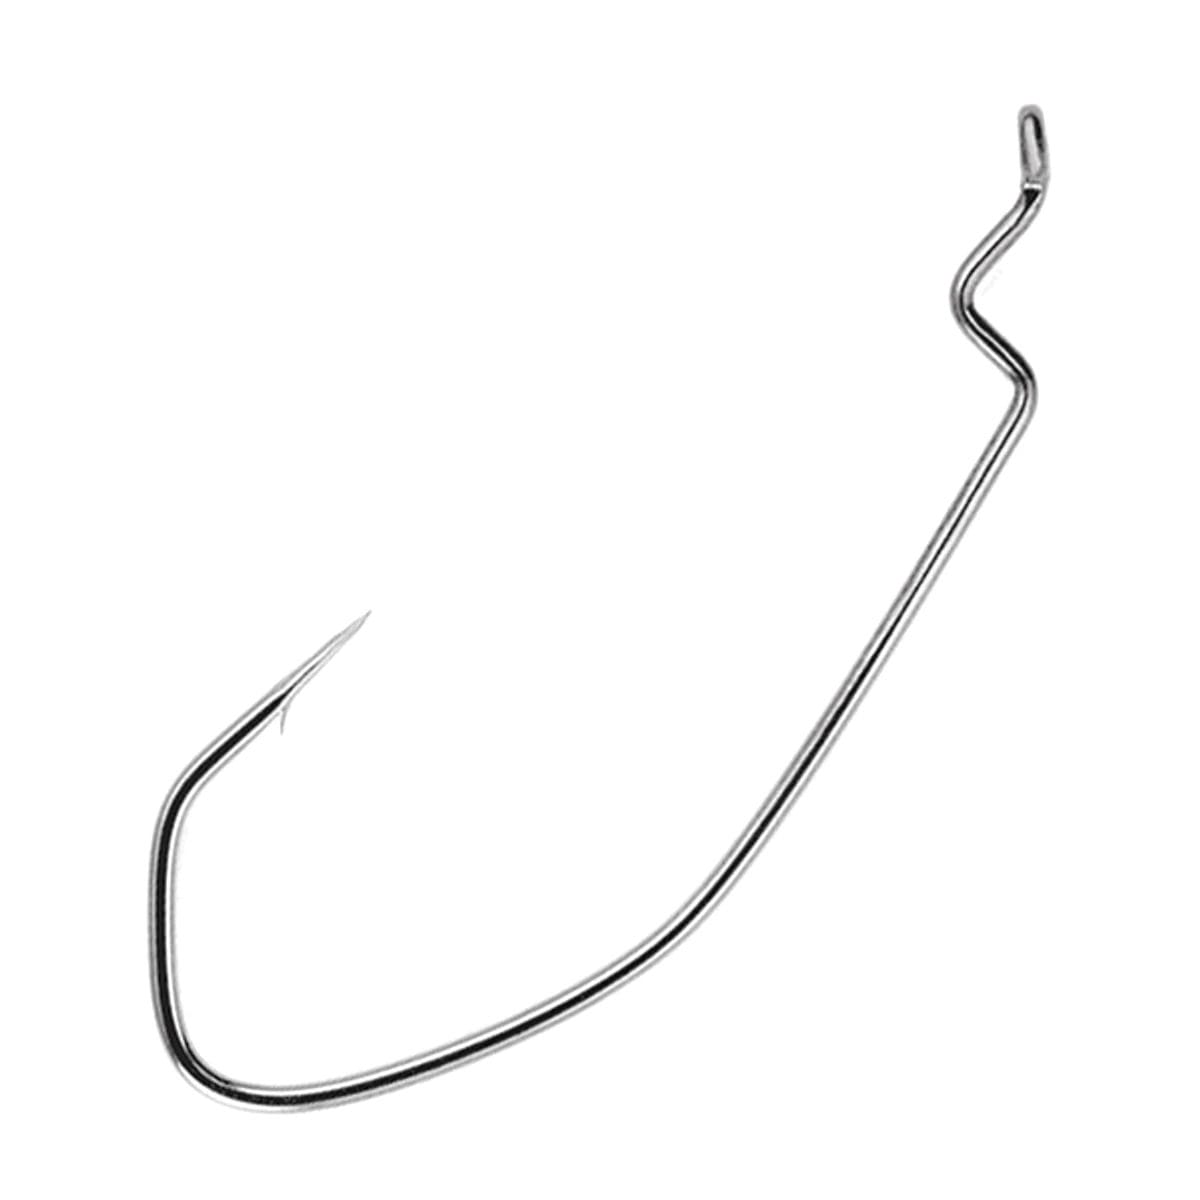 OWNER Offset Wide Gap Fishing Hooks - 2/0 * CLEARANCE SALE *